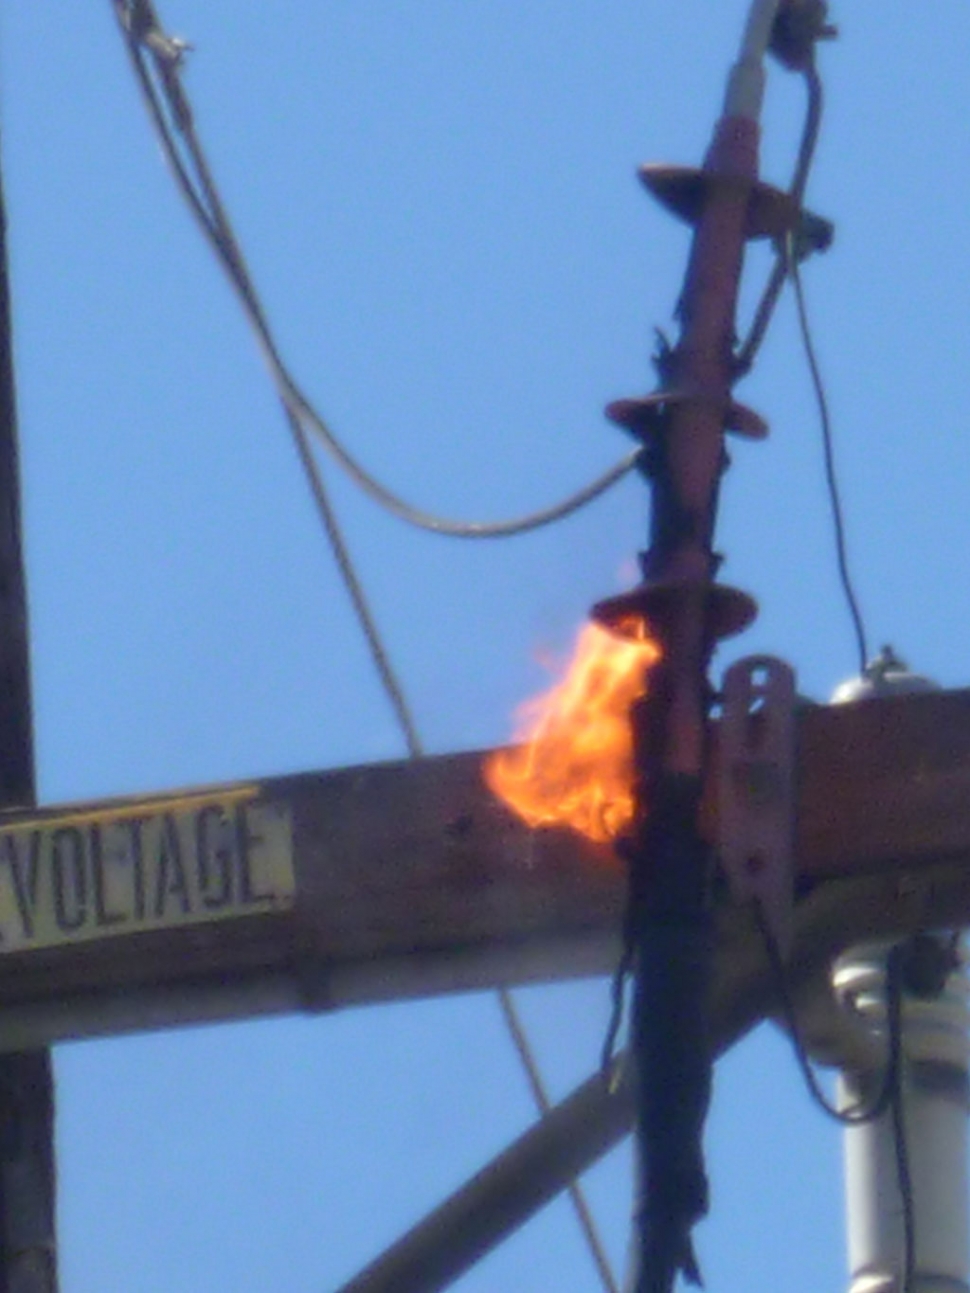 On Tuesday, November 2, at about 1:00 in the afternoon an electrical pole caught fire right after it blew a fuse. The block of Kensington Street and the north side of Sespe were without power for several hours.